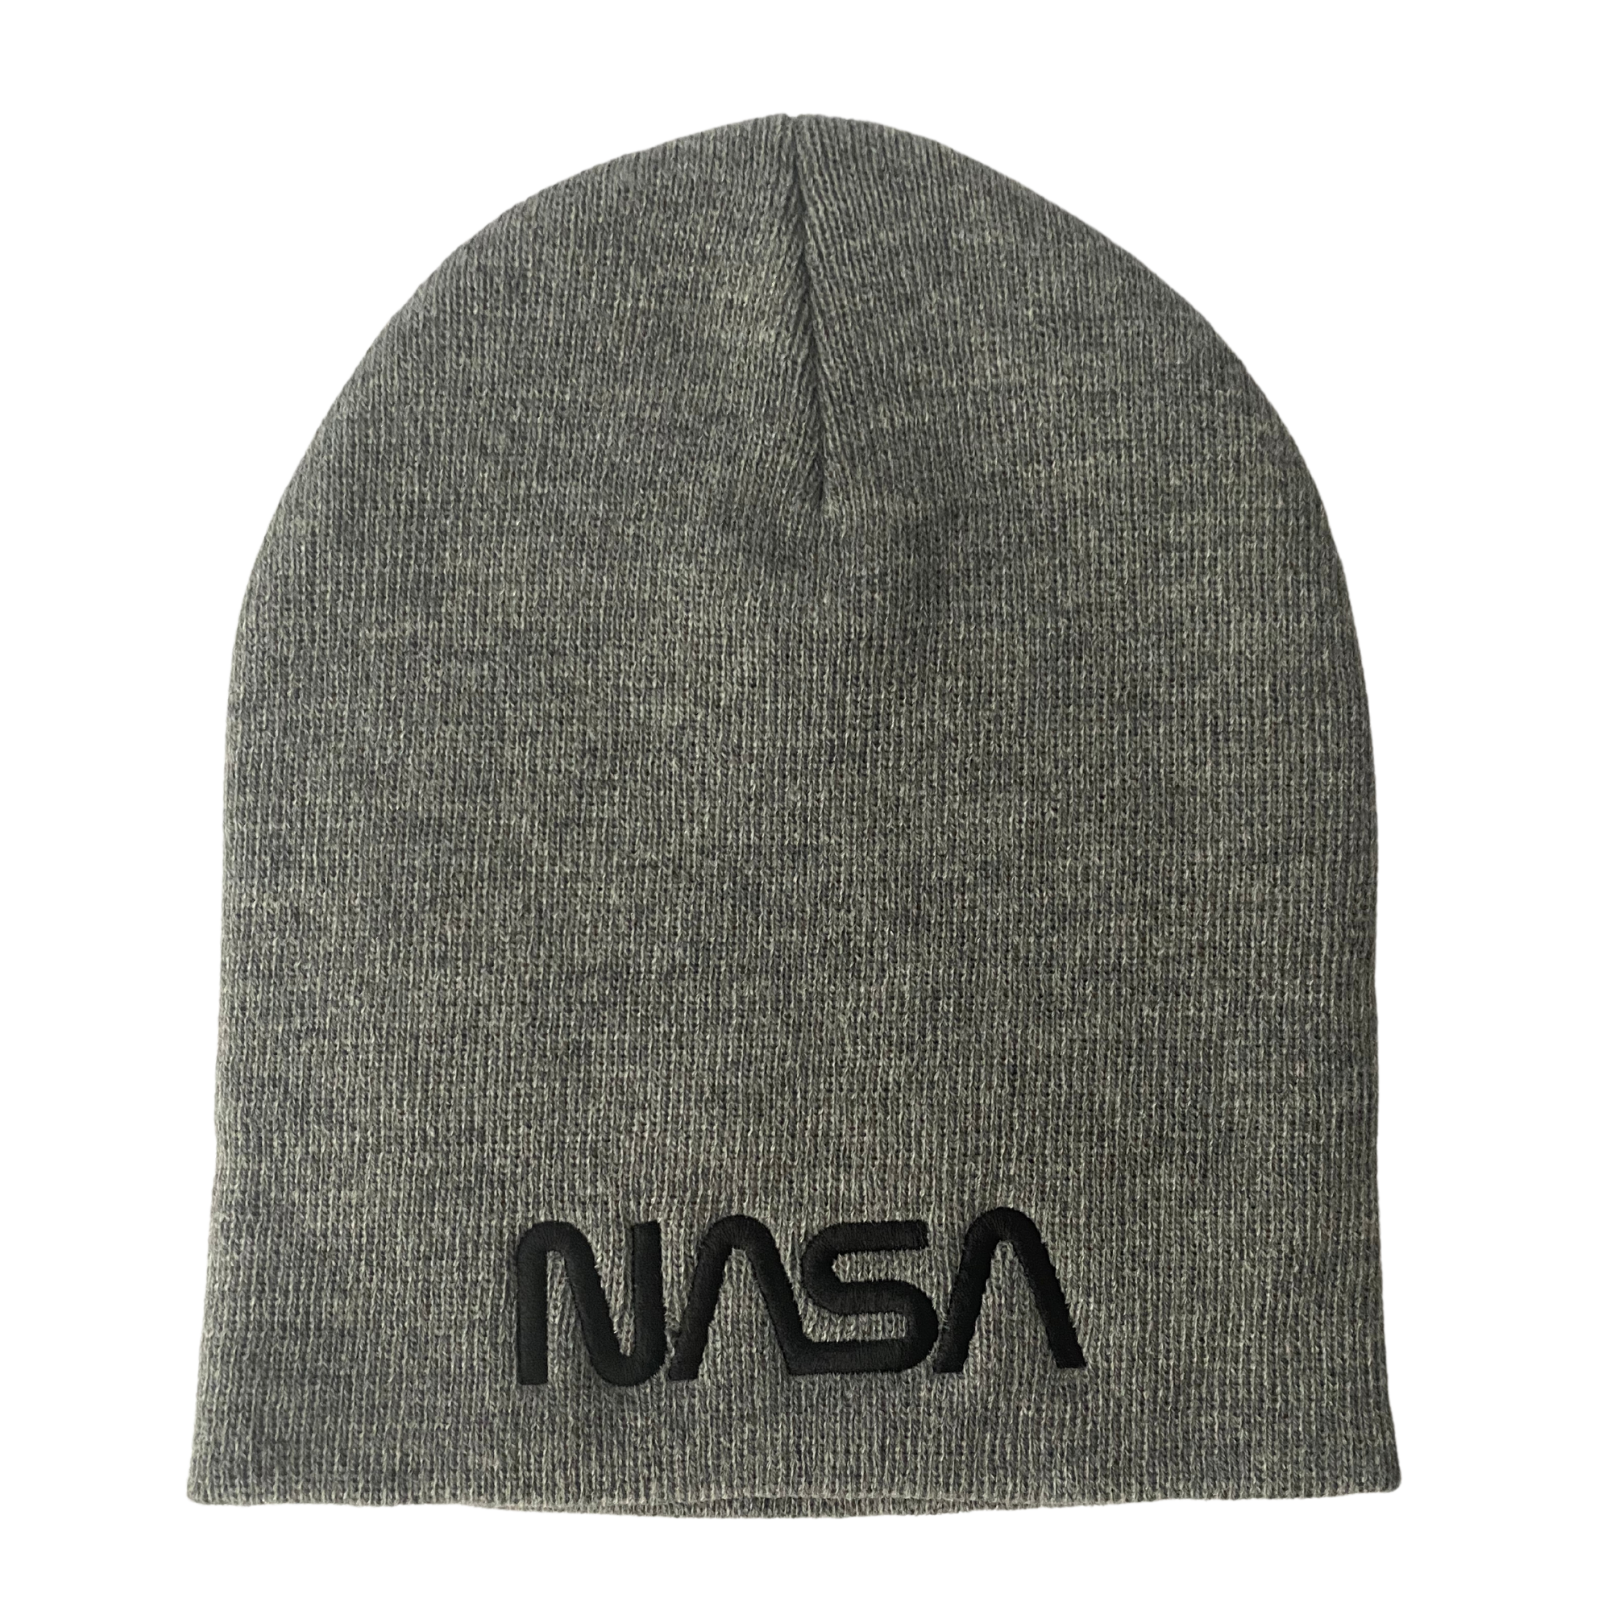 NASA Worm Logo Embroidered Beanie - Assorted Colors